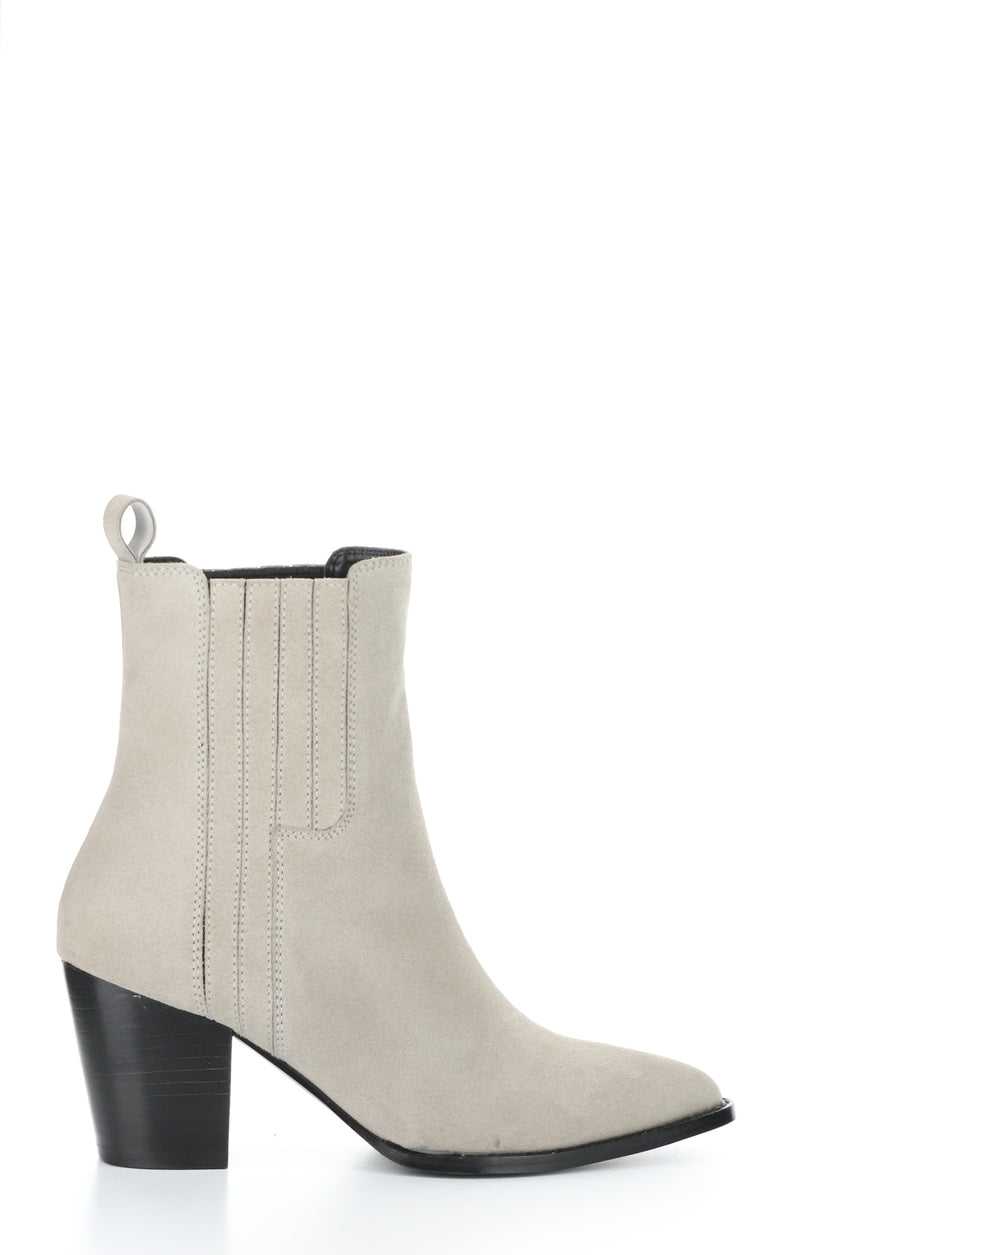 TRULY DK GREY Pointed Toe Boots